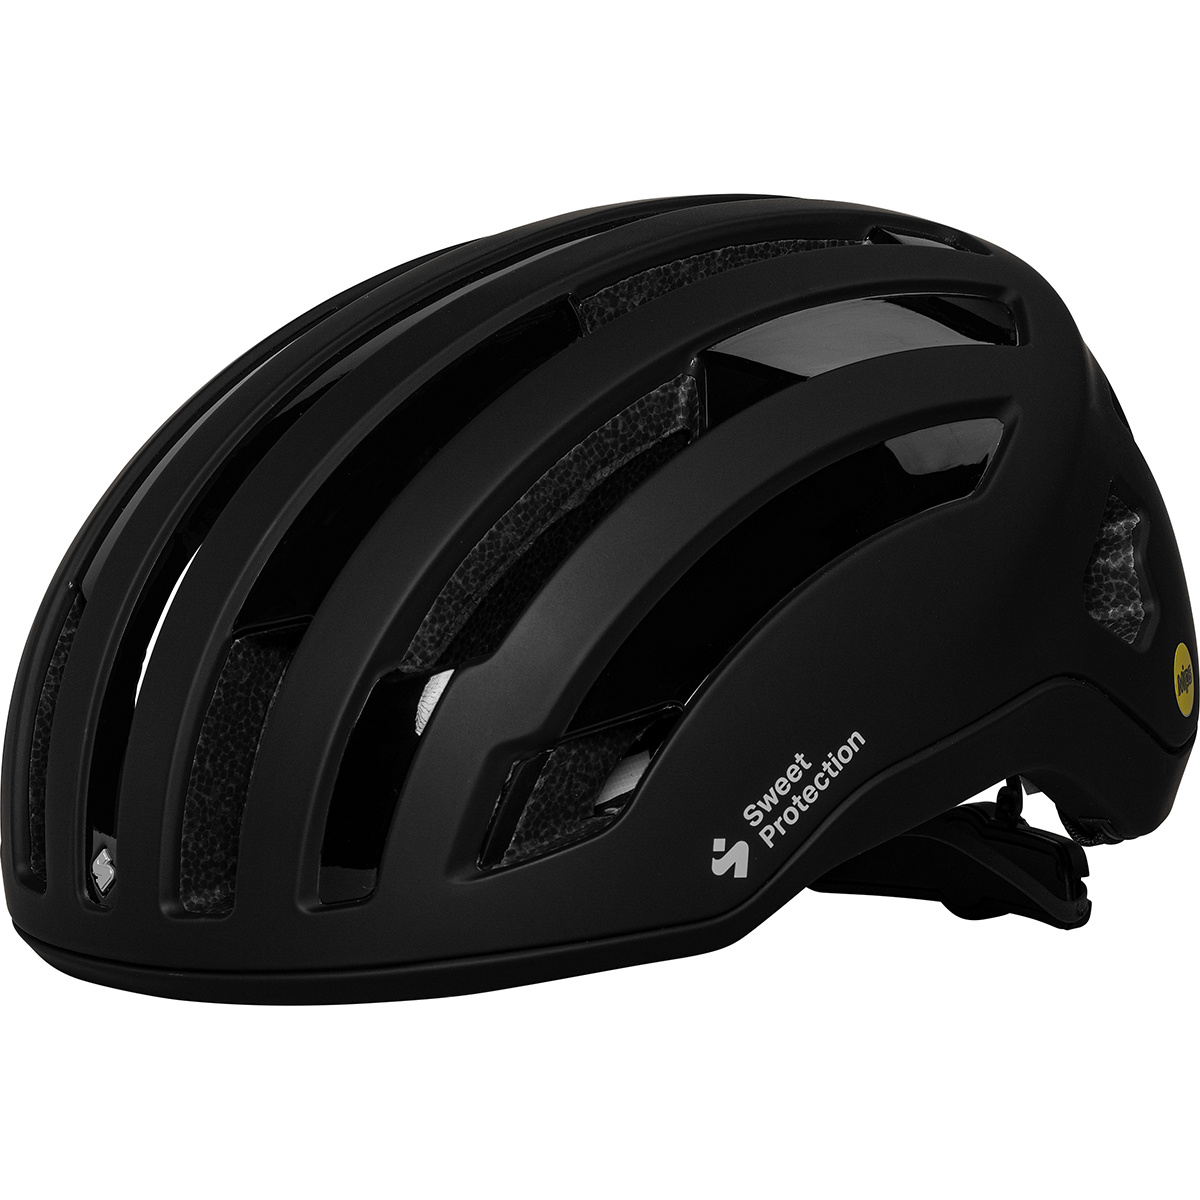 Image of Sweet Protection Casco da ciclismo Outrider MIPS